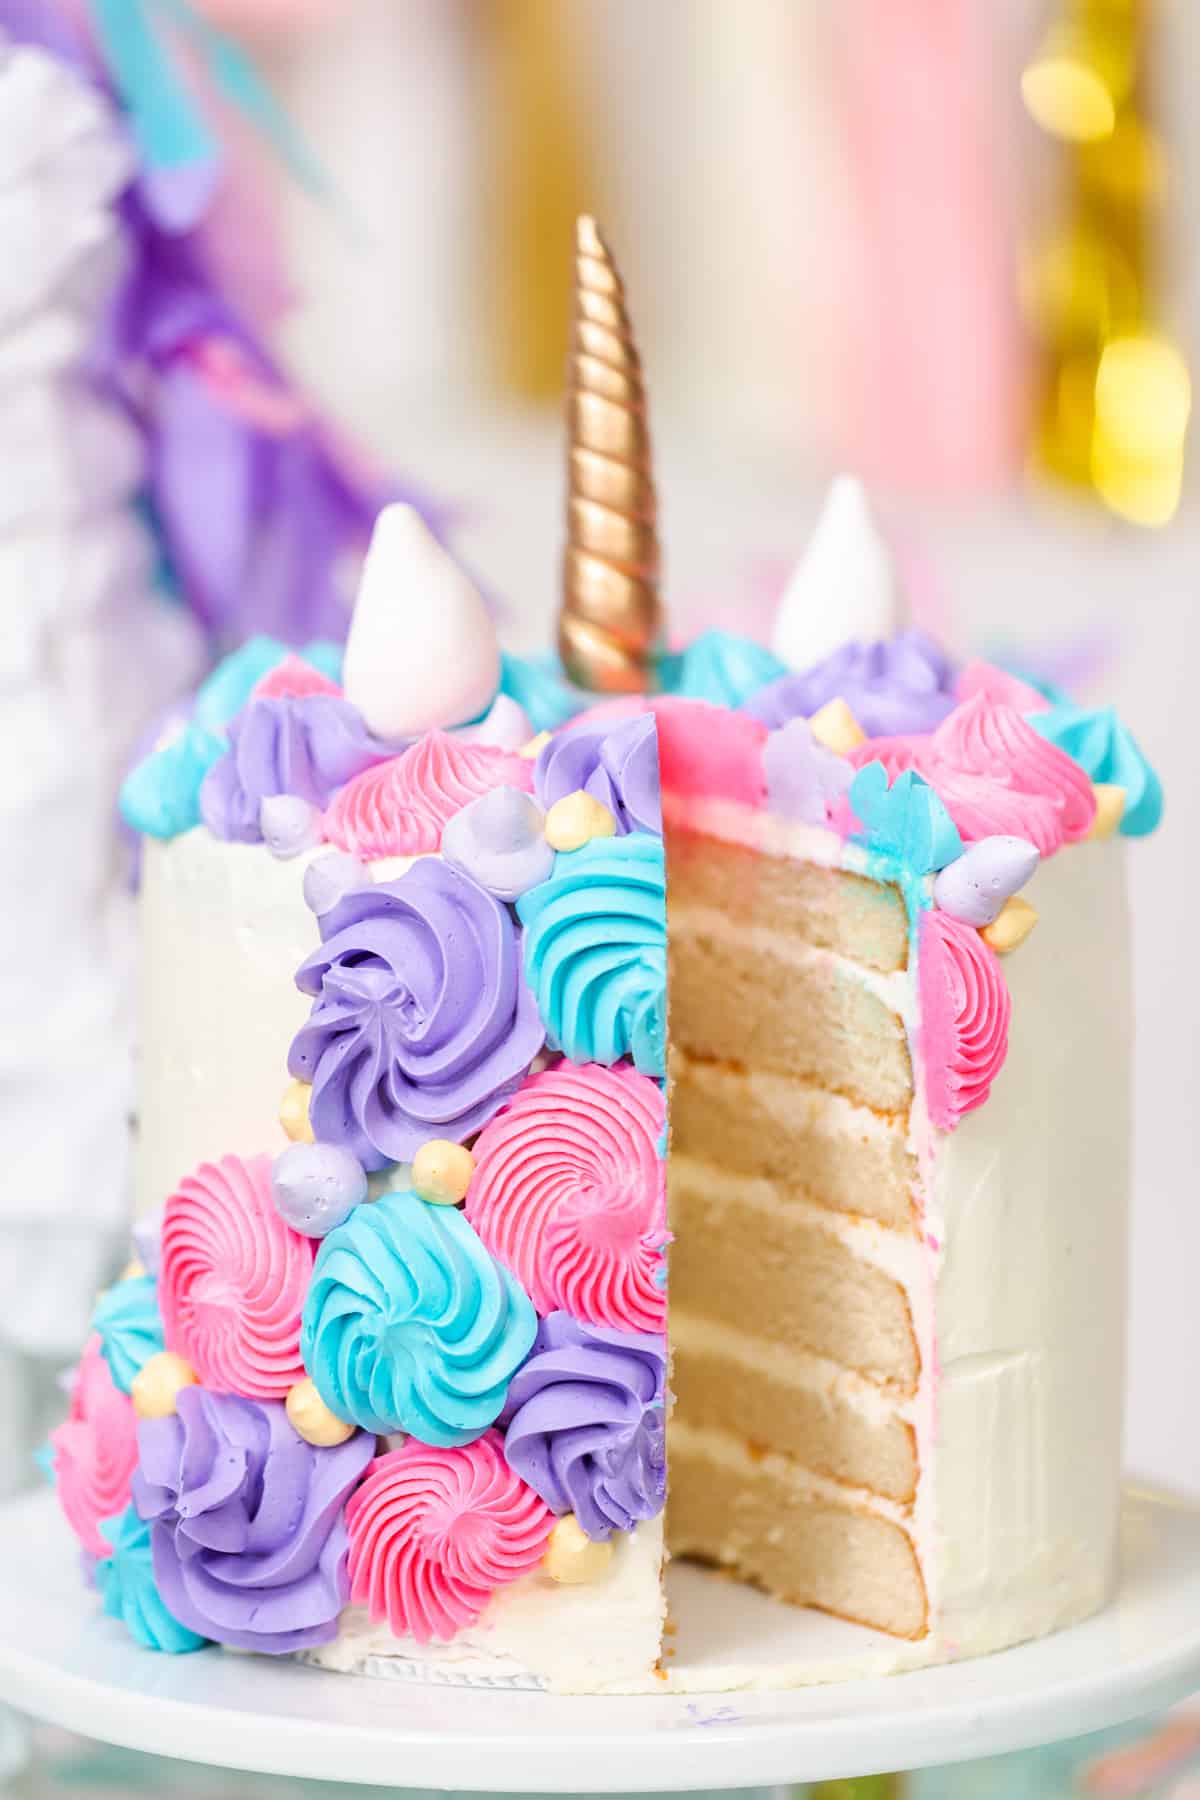 A unicorn cake with a slice missing